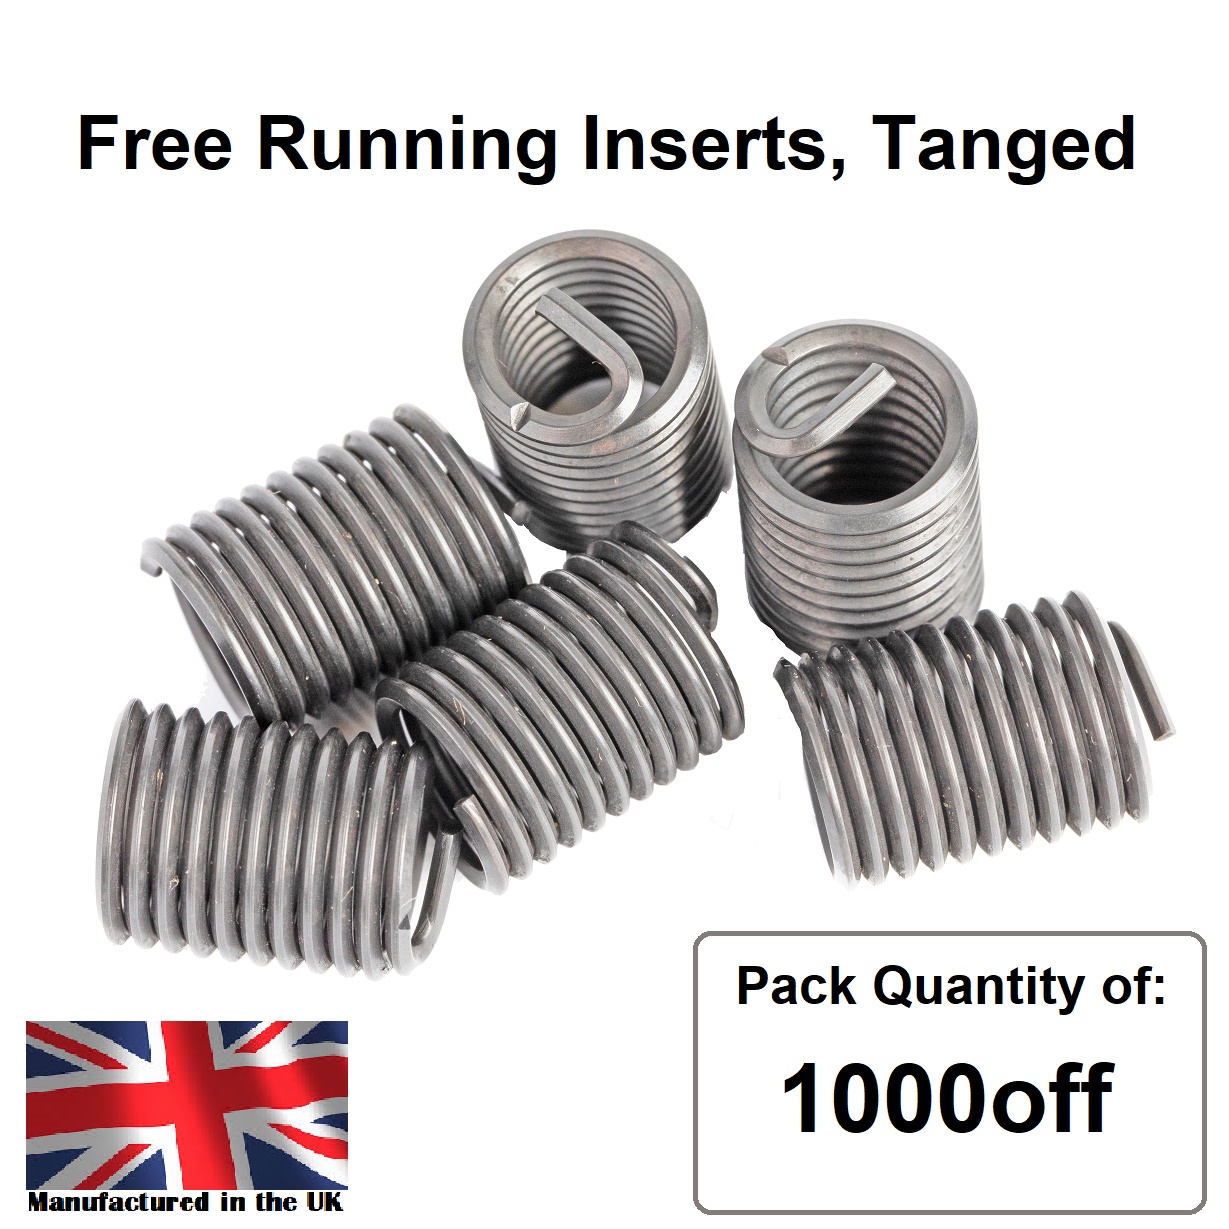 5/8 x 18 x 3D UNF, Free Running, Tanged, Wire Thread Repair Insert, 304/A2 Stainless (Pack 1000)